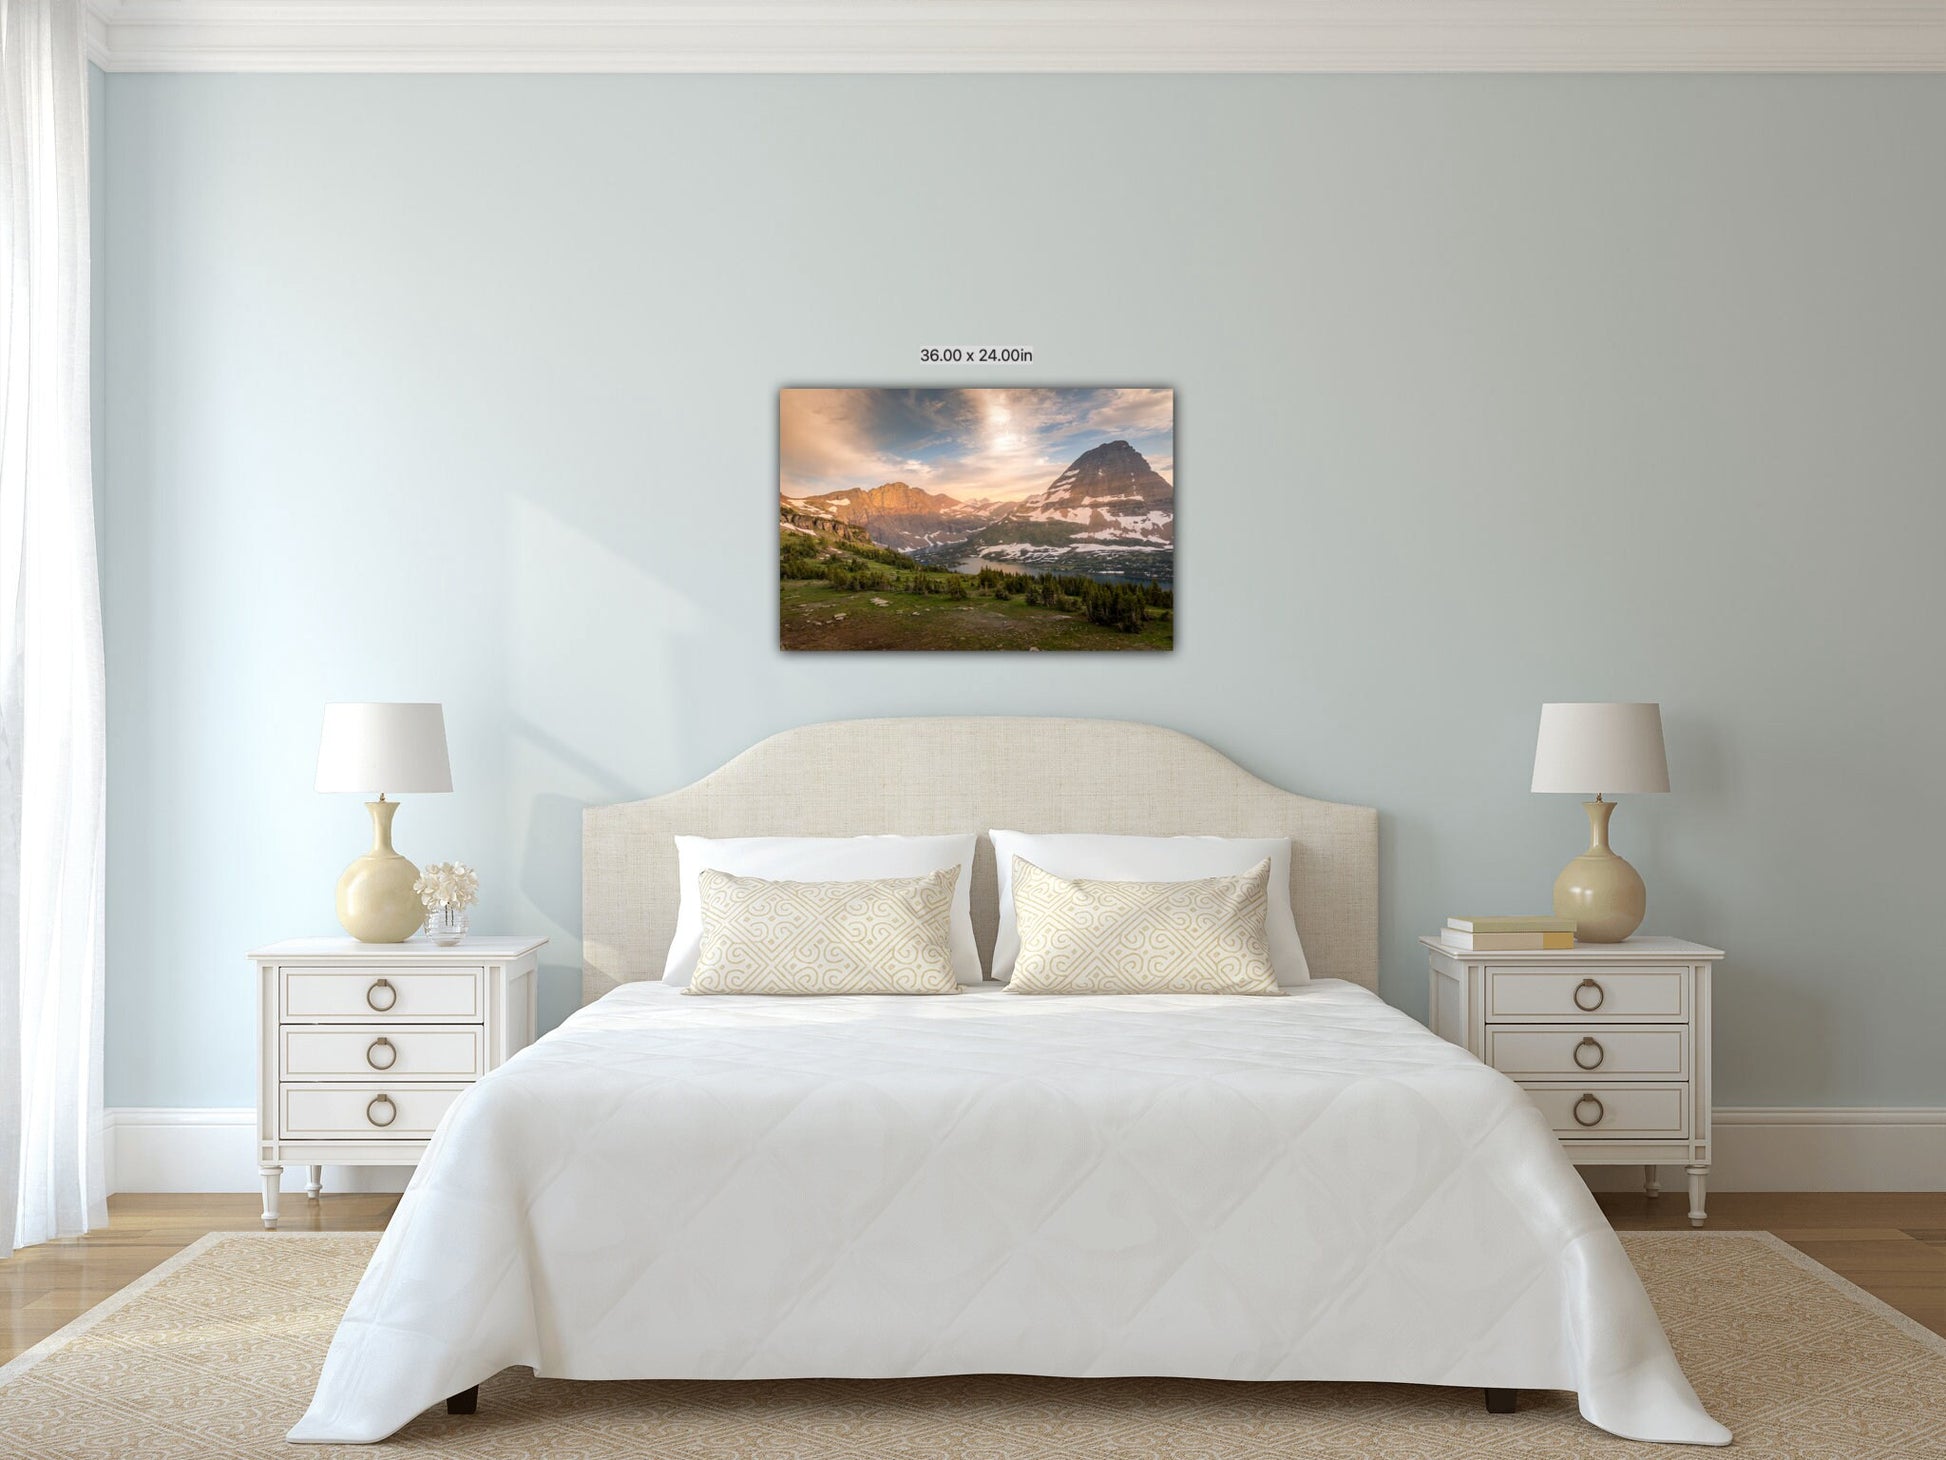 Hidden Lake Sunset, Glacier National Park Montana, Canvas Wall Art Prints-Wall Decor for Home, Living Room, Bedroom, Office and Kitchen